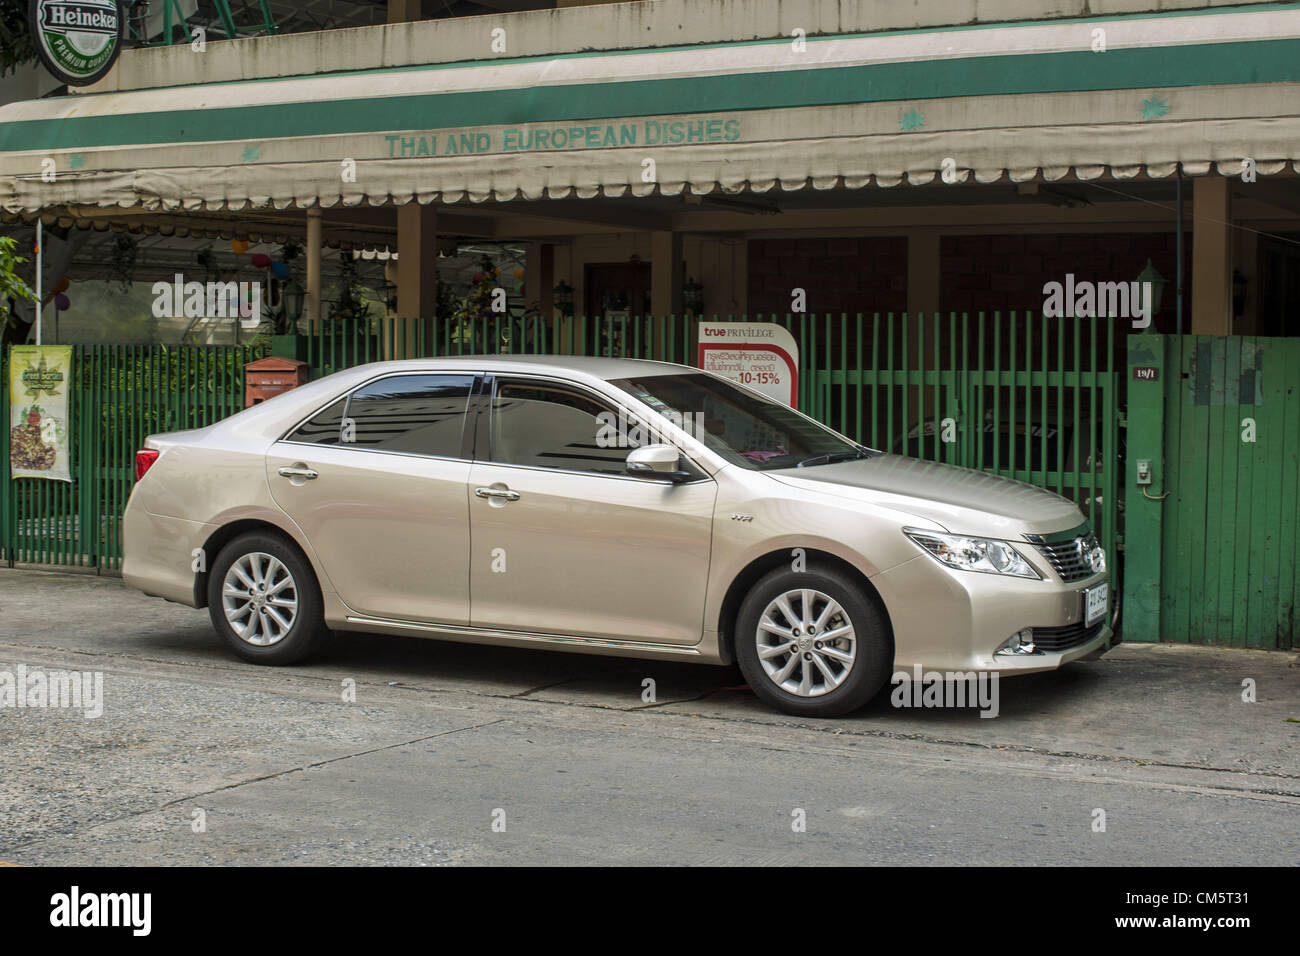 Oct. 11, 2012 - Bangkok, Thailand - A Toyota Camry parked on a street in Bangkok, Thailand. About 160,000 units of Toyota's popular Camry and Corolla models produced between March 21, 2006 and May 31, 2010 in Thailand are part of Toyota Motor's global recall. Toyota Motor Corp said yesterday it would recall more than 7.4 million vehicles worldwide because the faulty power window switch was a potential fire hazard, the latest in a series of setbacks that have dented the reputation of Japan's biggest automaker. The voluntary move is the biggest single recall since Ford pulled 8 million vehicles  Stock Photo